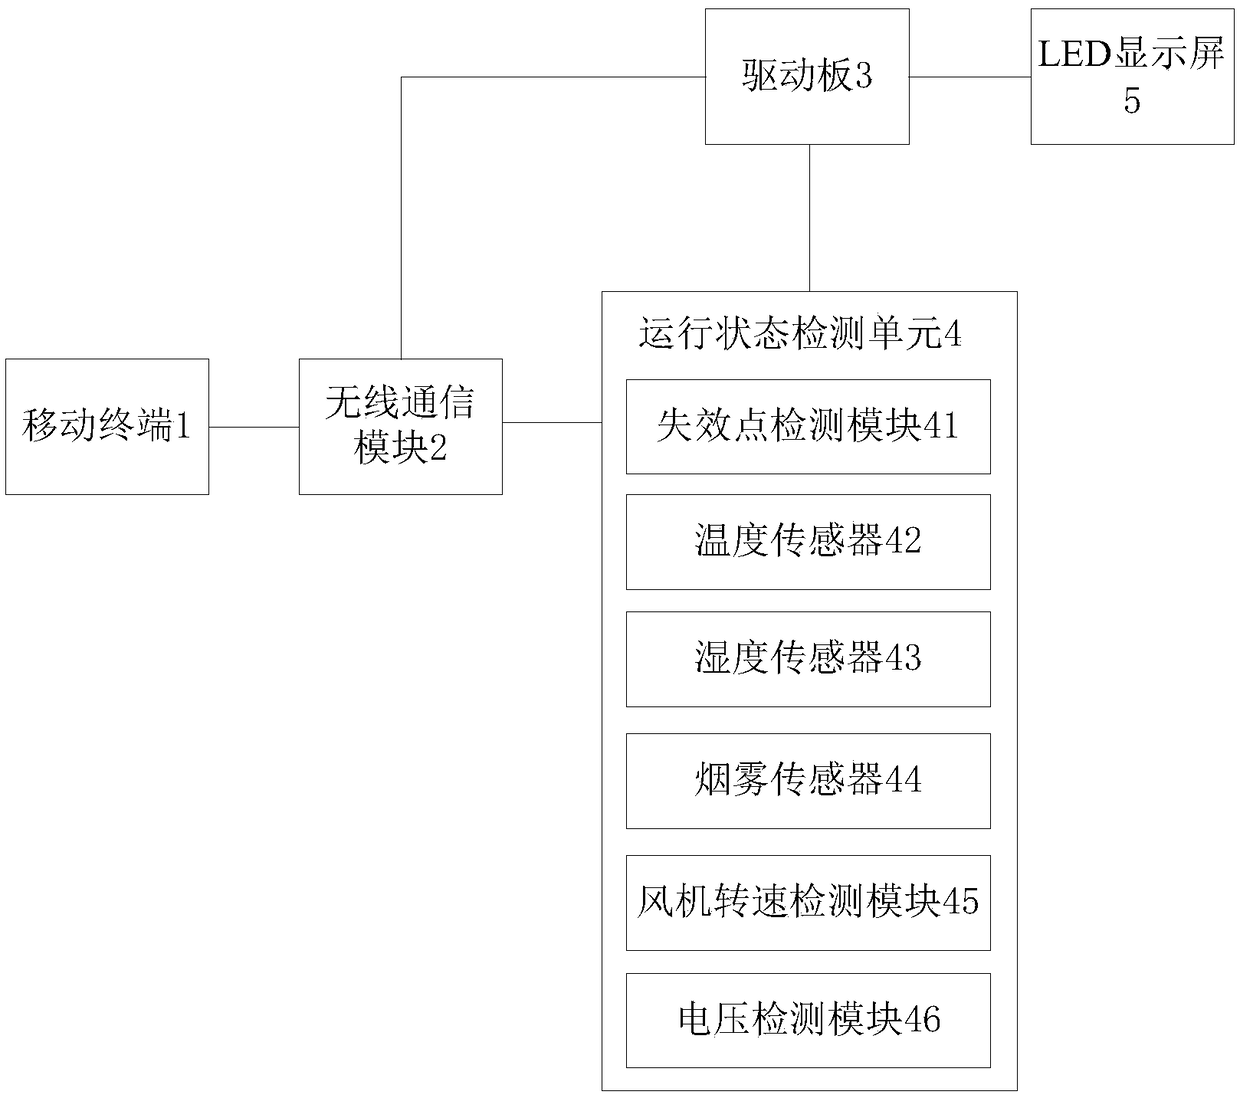 Remote intelligent monitoring system and method for LED display screen operation state